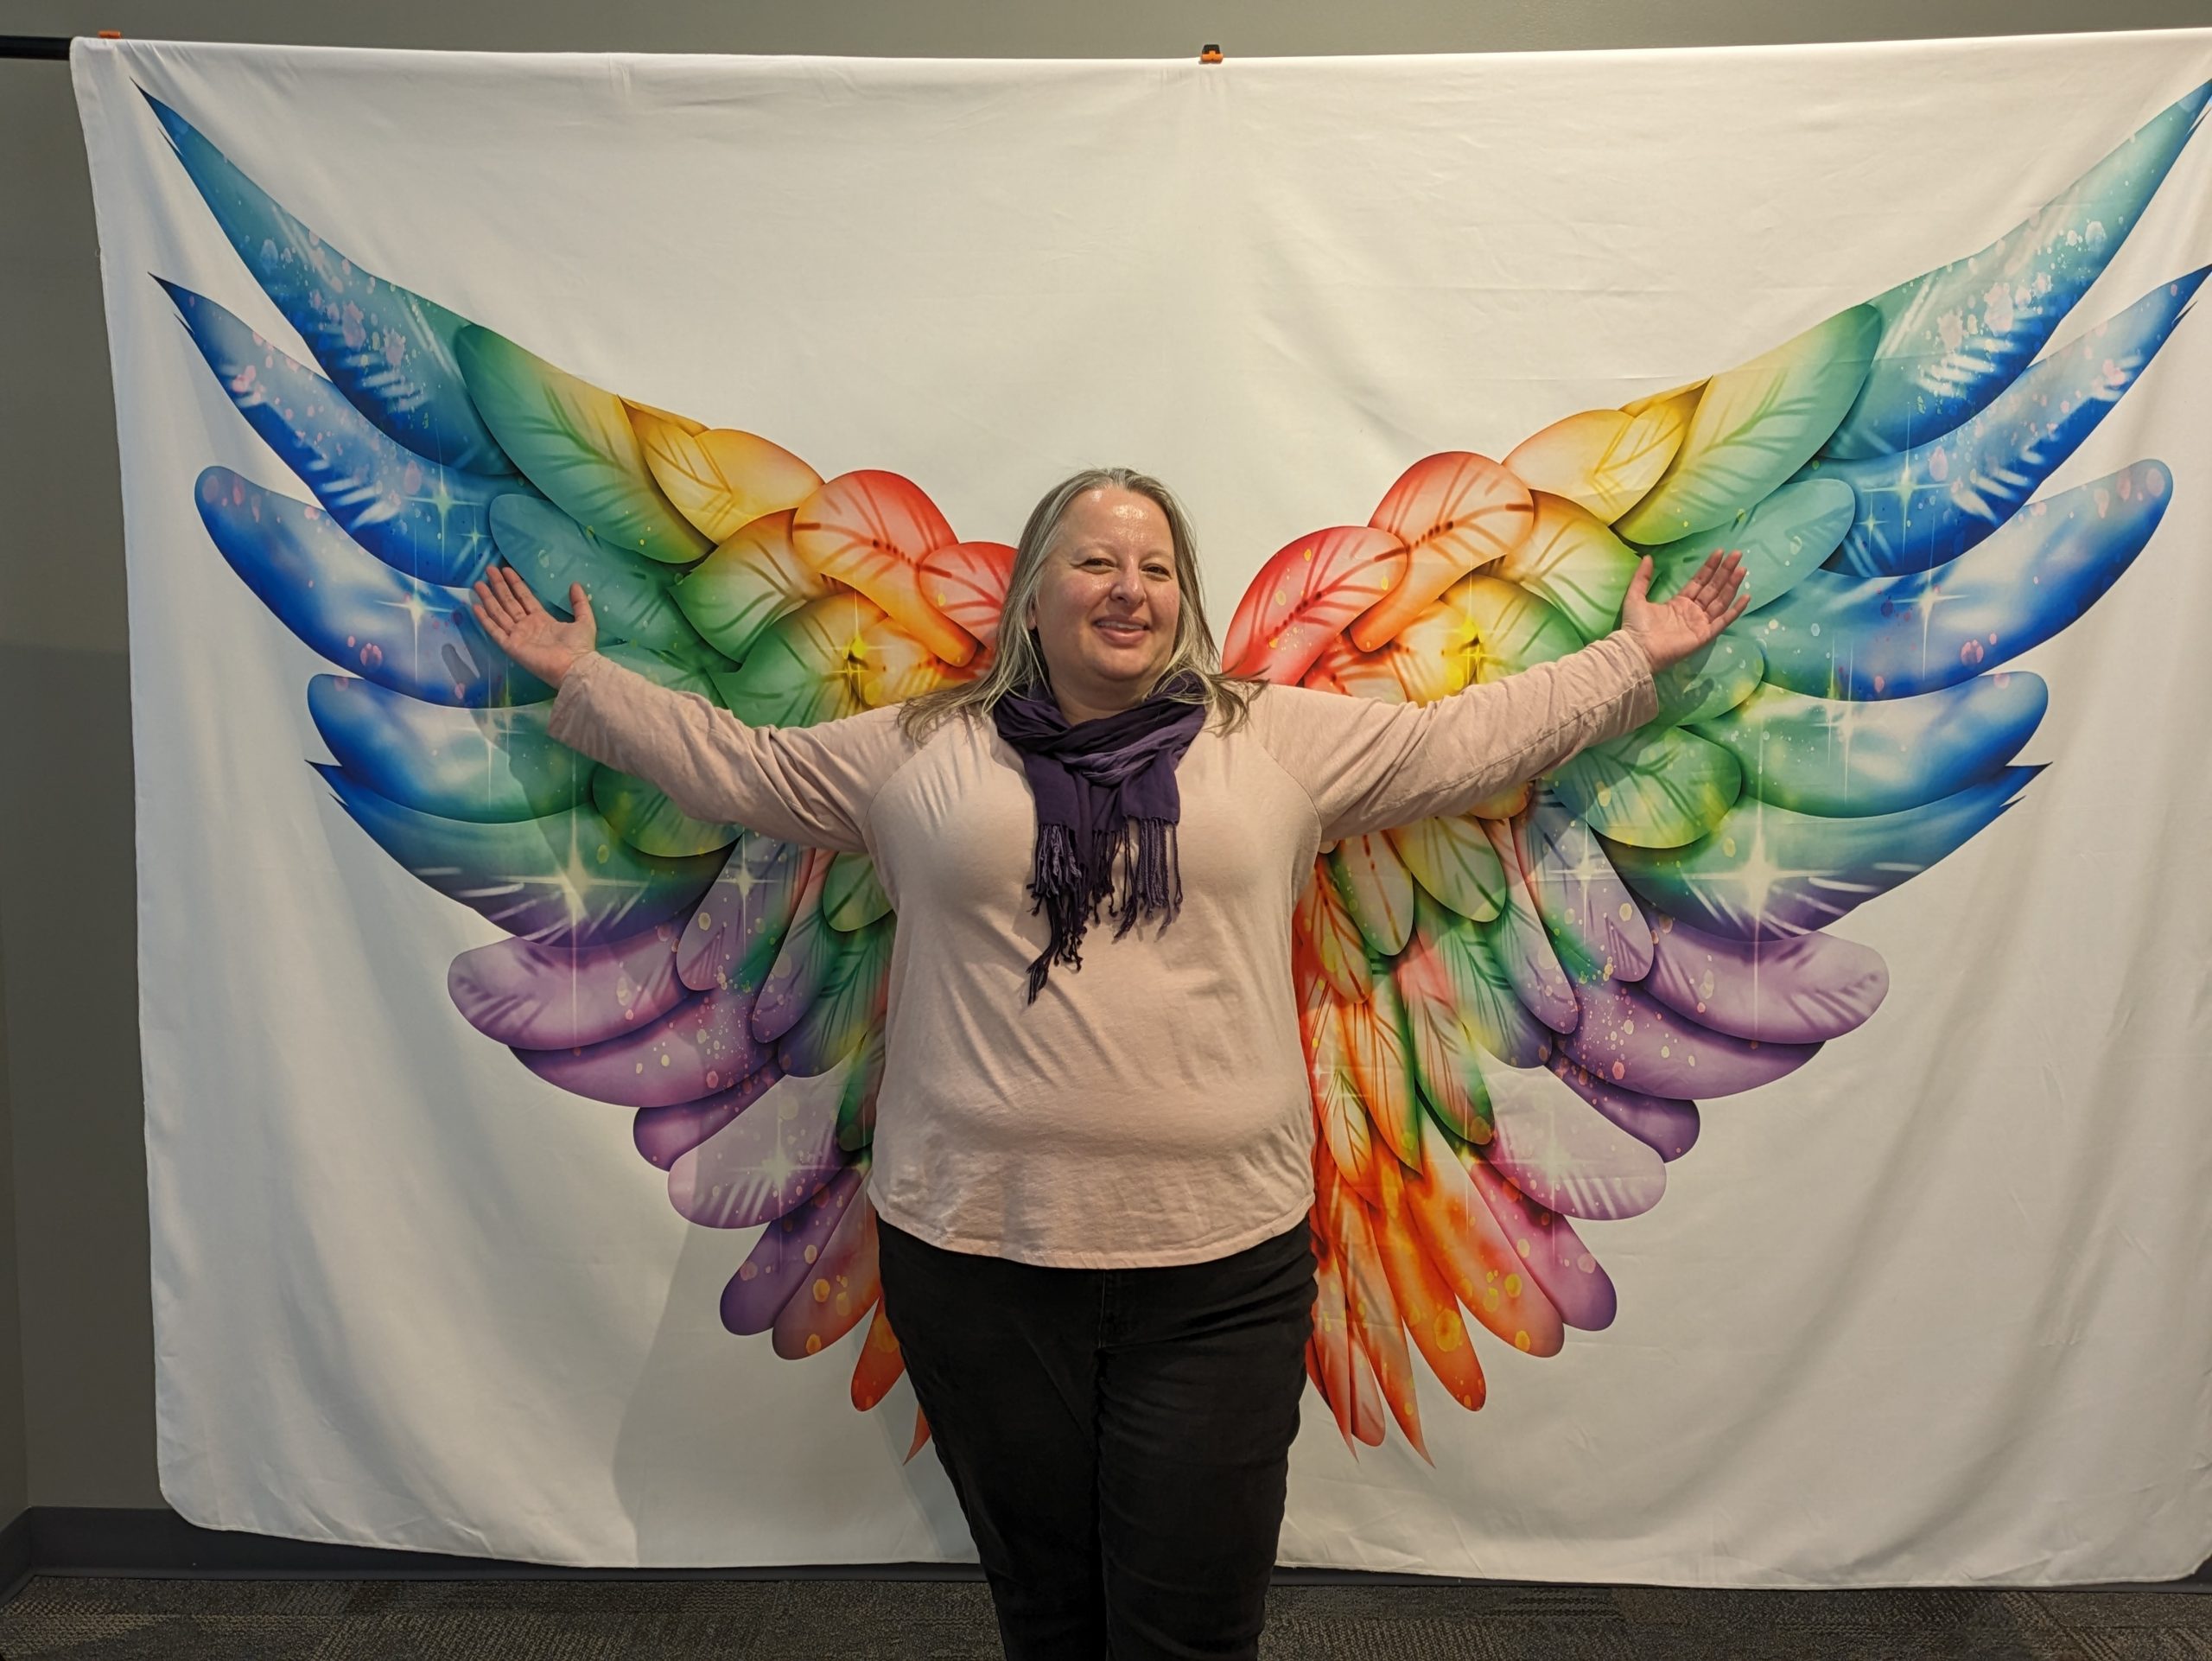 Christina posed in front of painted angel wings with arms extended